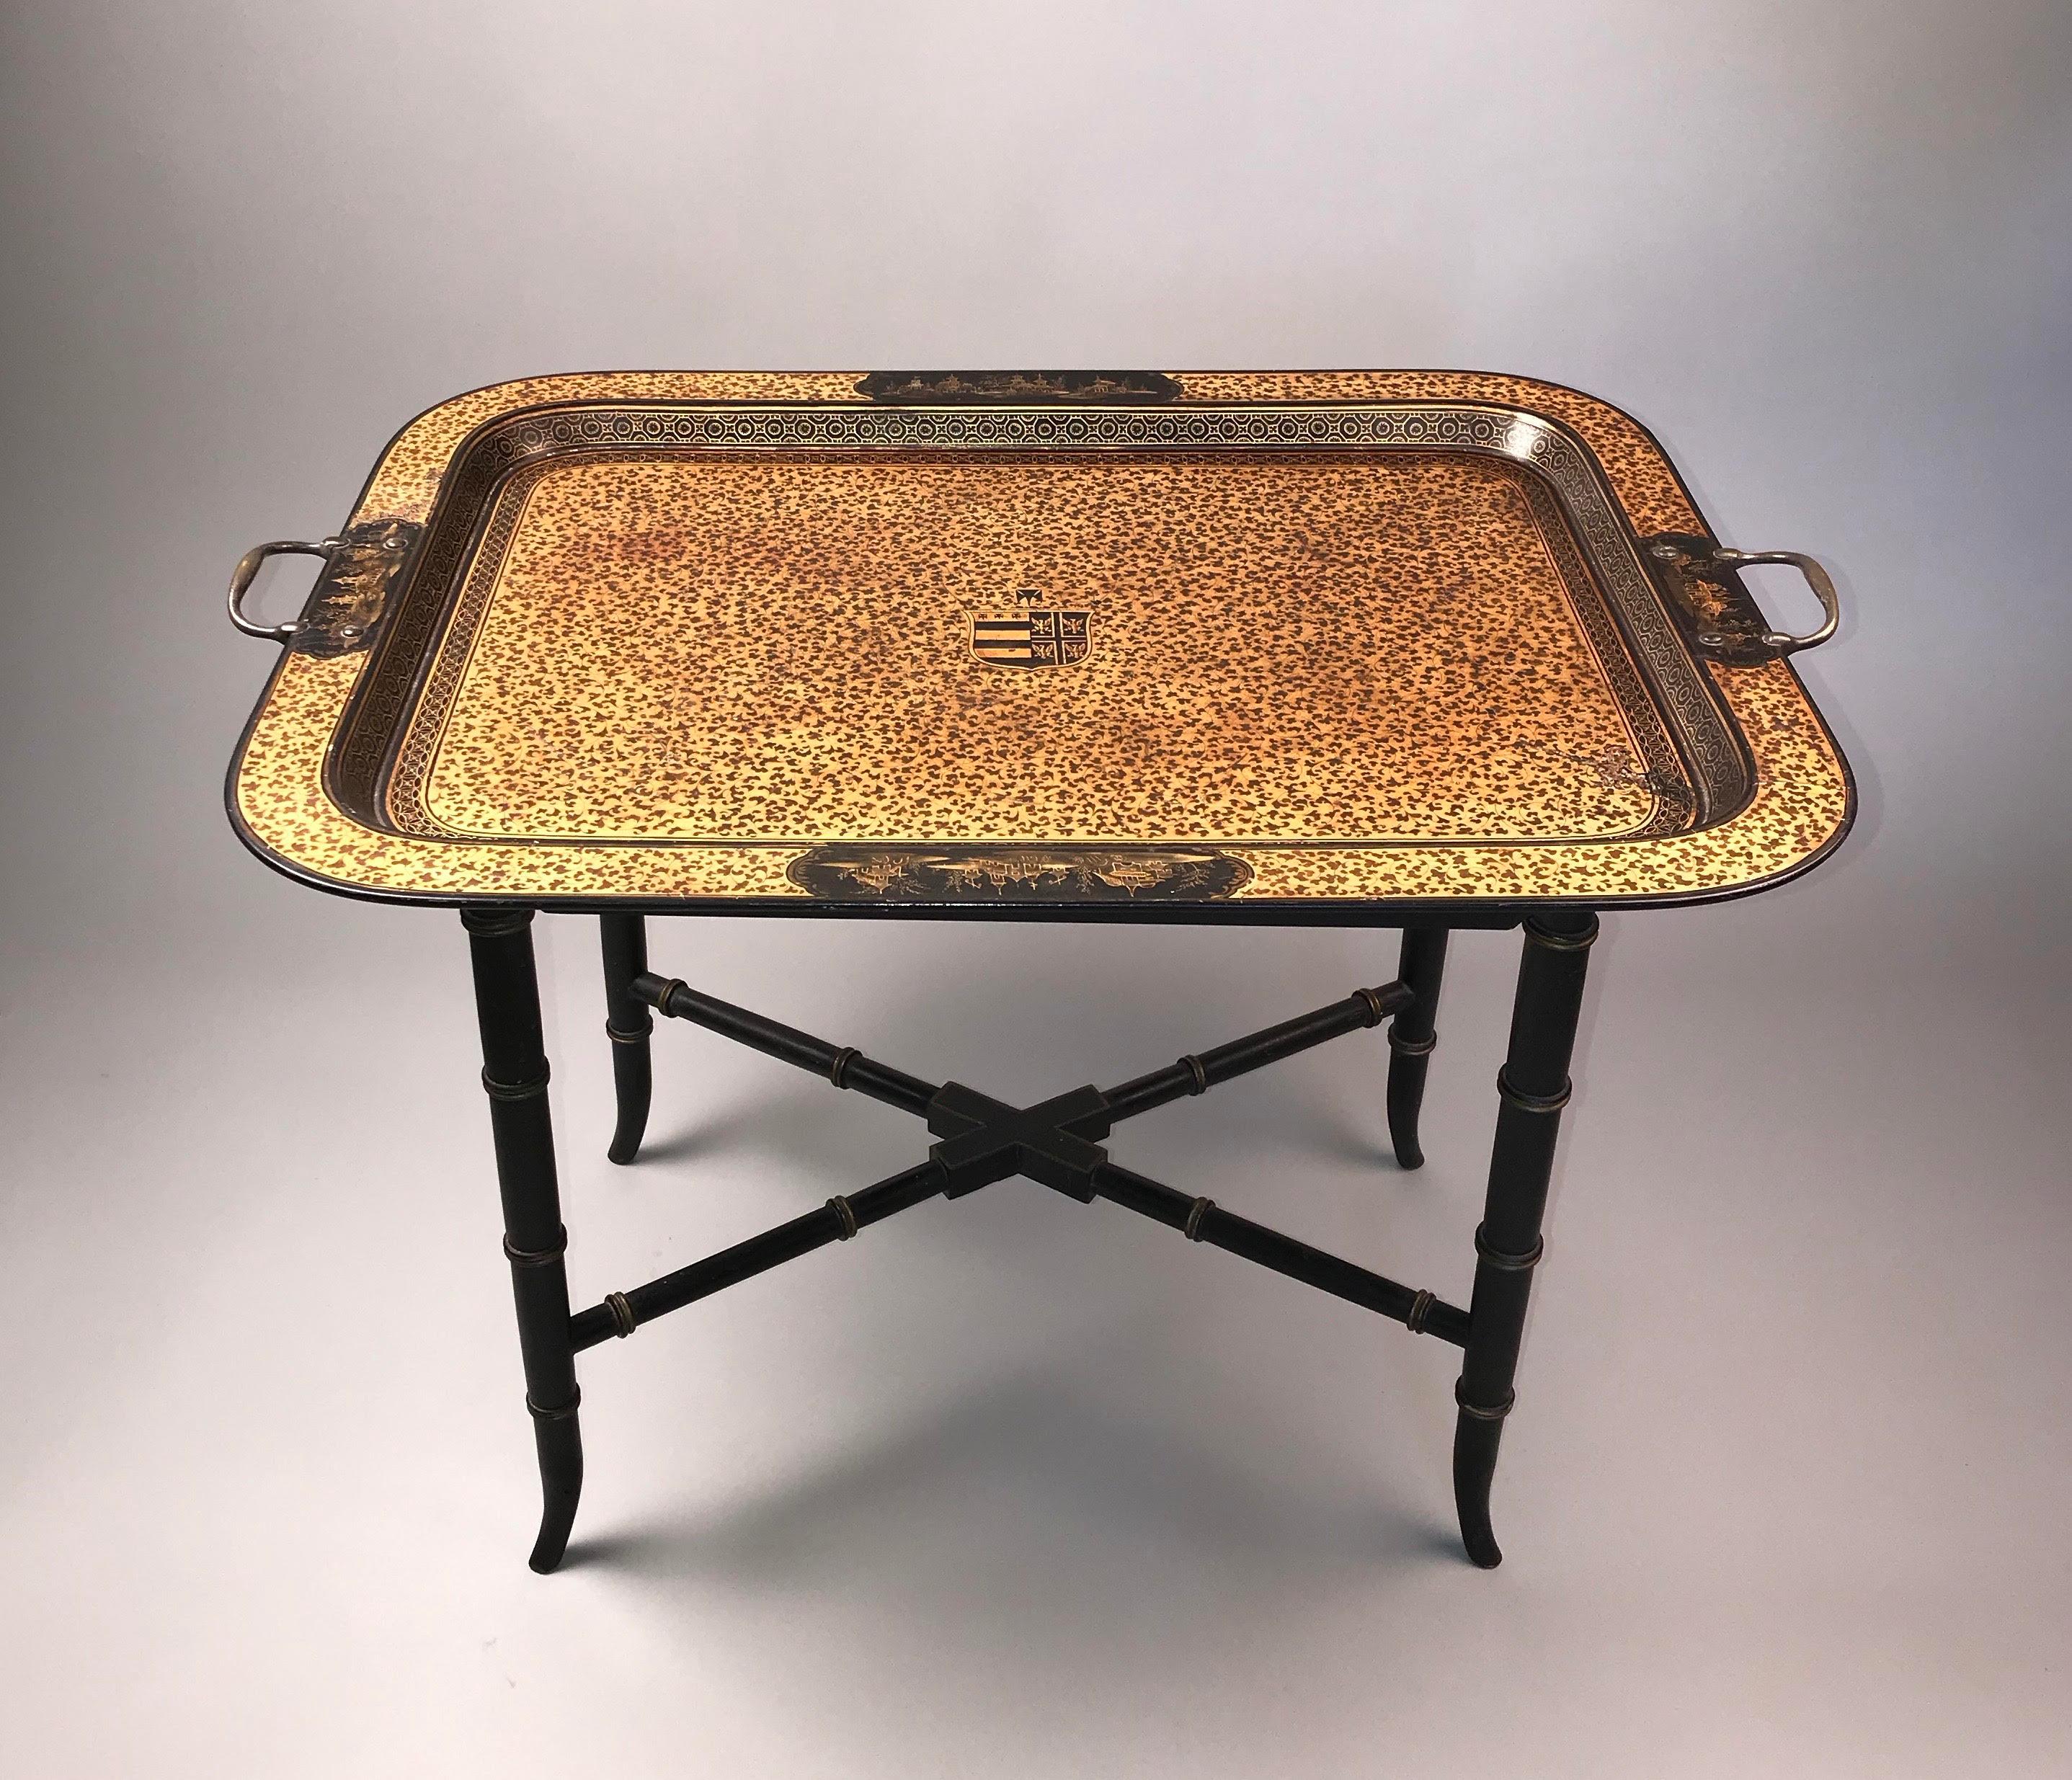 A rare English Regency period japanned tray table. 
Early 19th century, circa 1810.

The dished top exquisitely decorated overall with complex floral designs in gilt, and unusually centered by an armorial. The raised borders have very finely